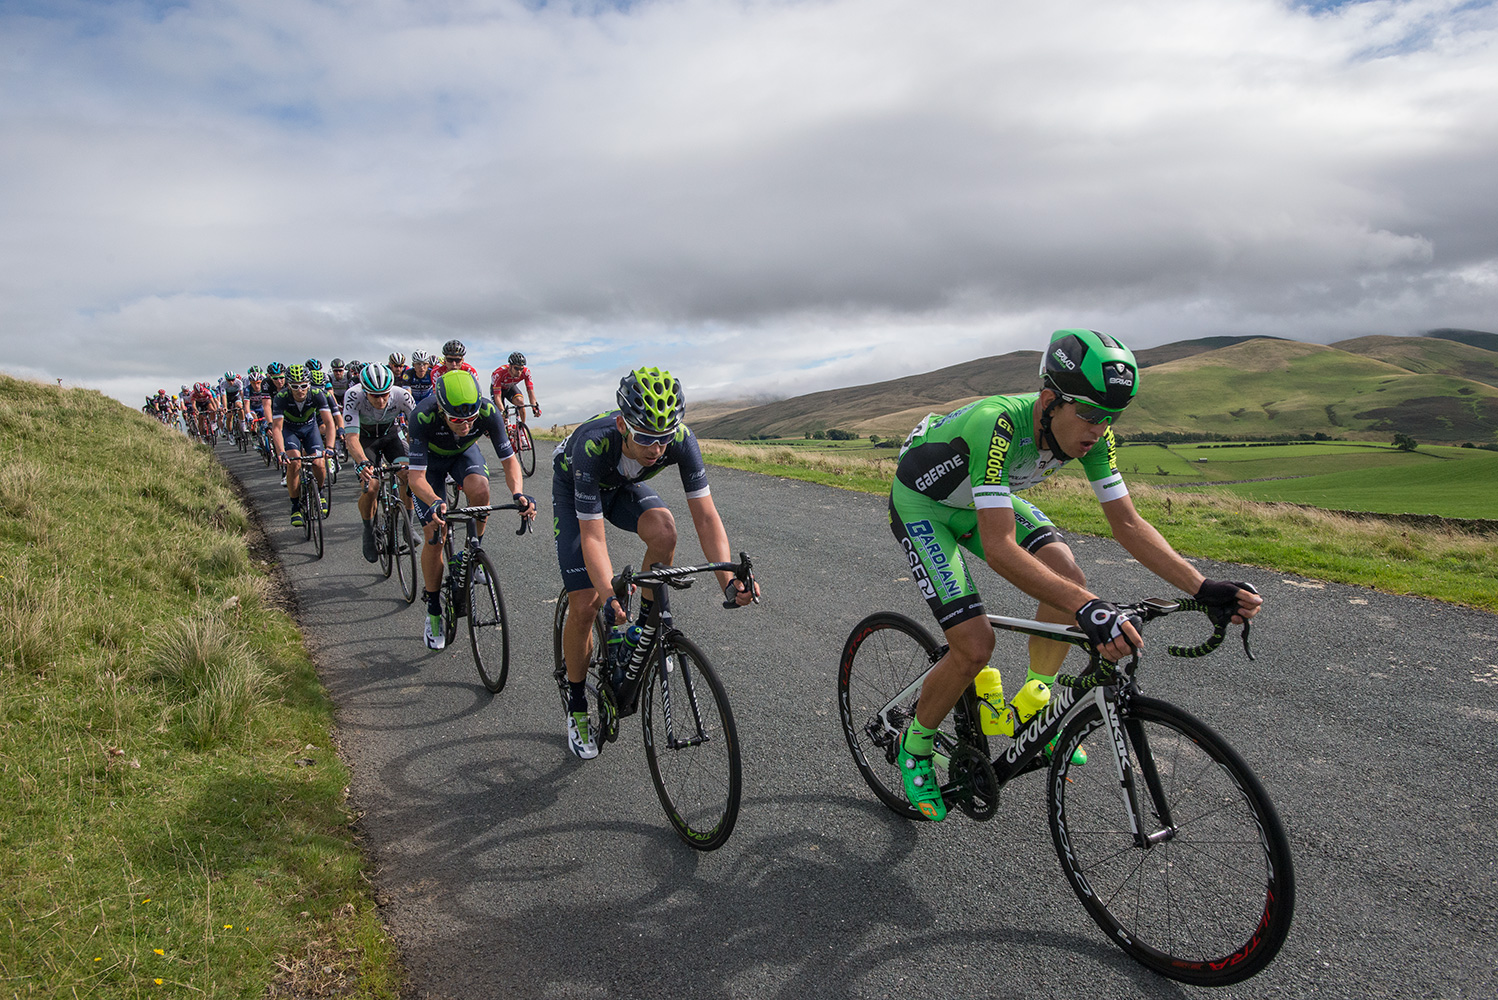 Bardiani GreenTeam leads the peleton over Caldbeck Commons in Cumbria on Stege 2